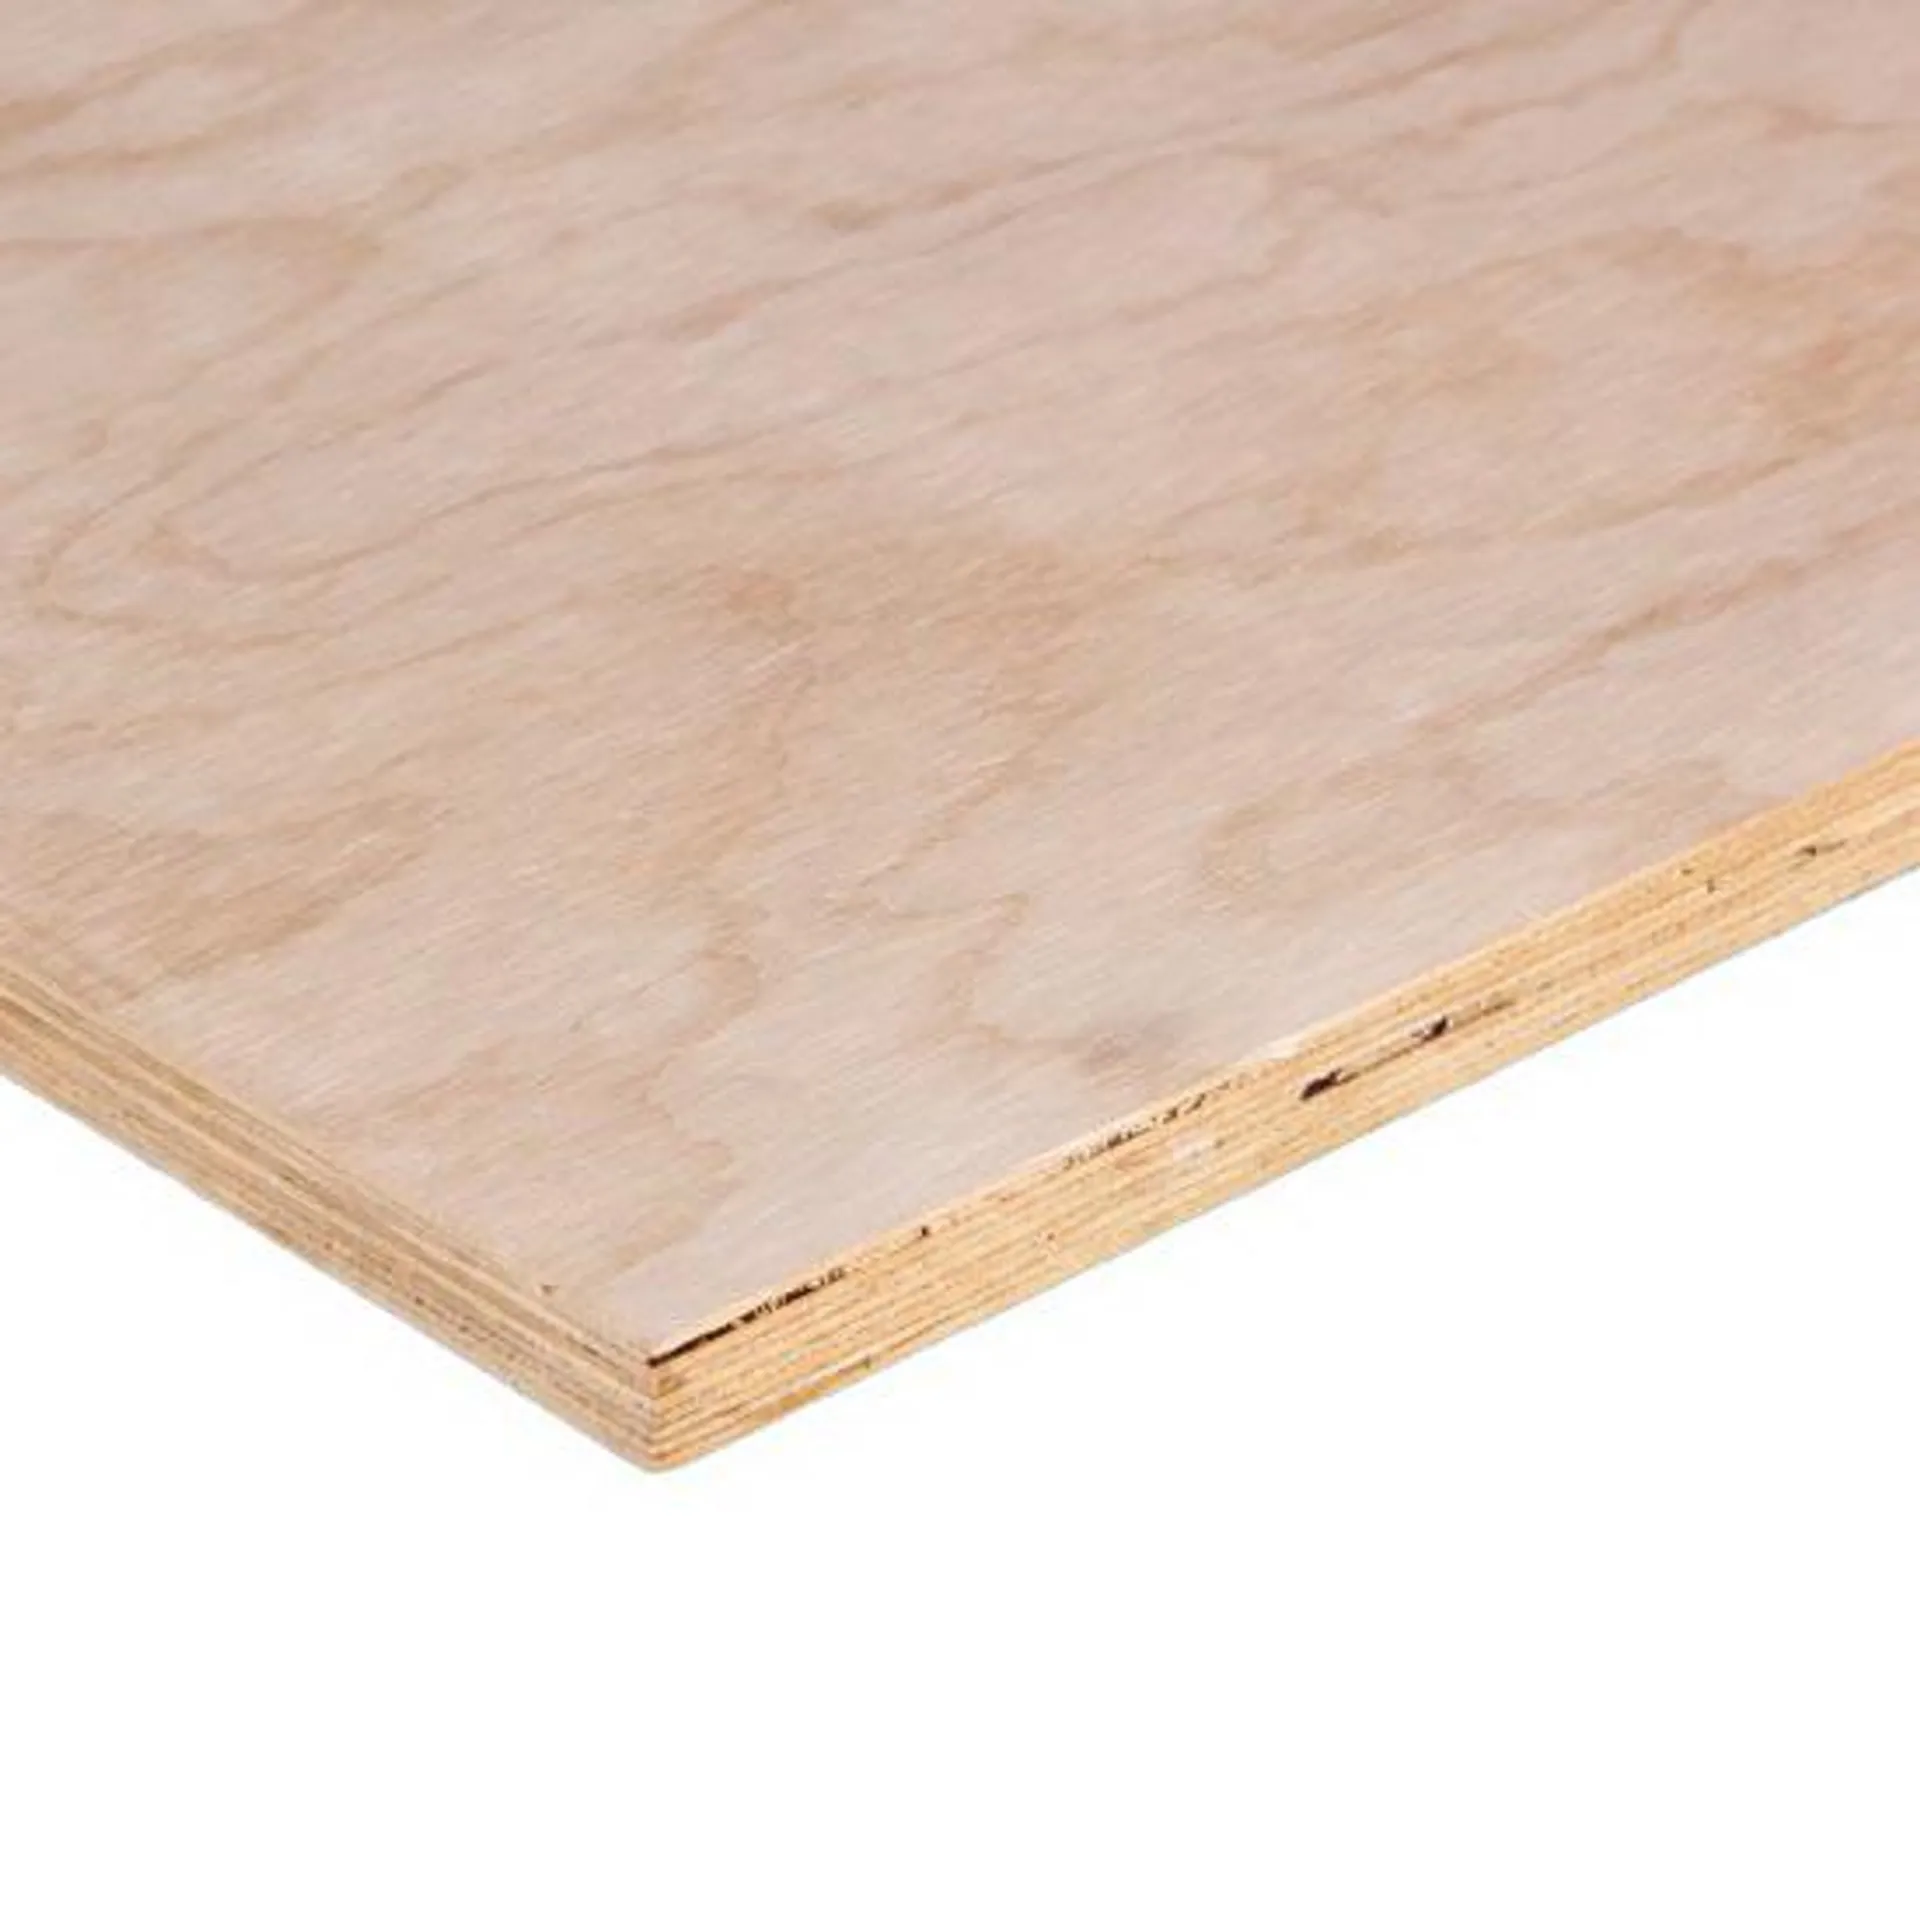 AC Plywood, 1/4 in x 4 ft x 8 ft - Southern Pine